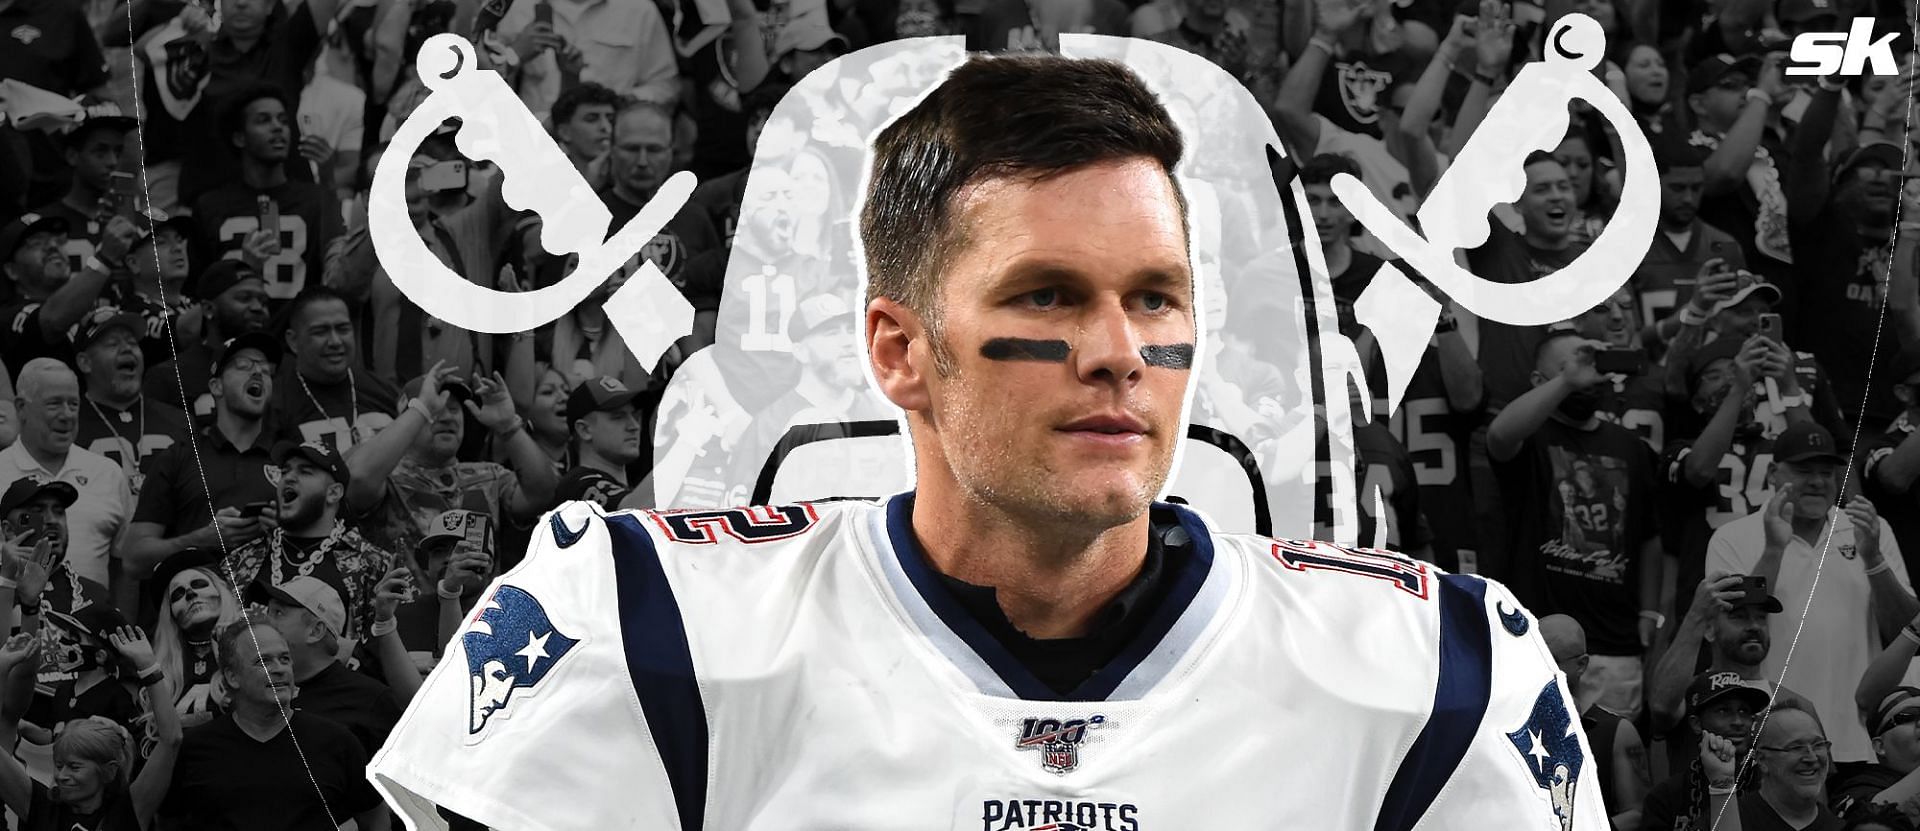 Tom Brady unsure about $5,100,000,000 conflict of interest over NFL unretirement with Raiders deal on hold